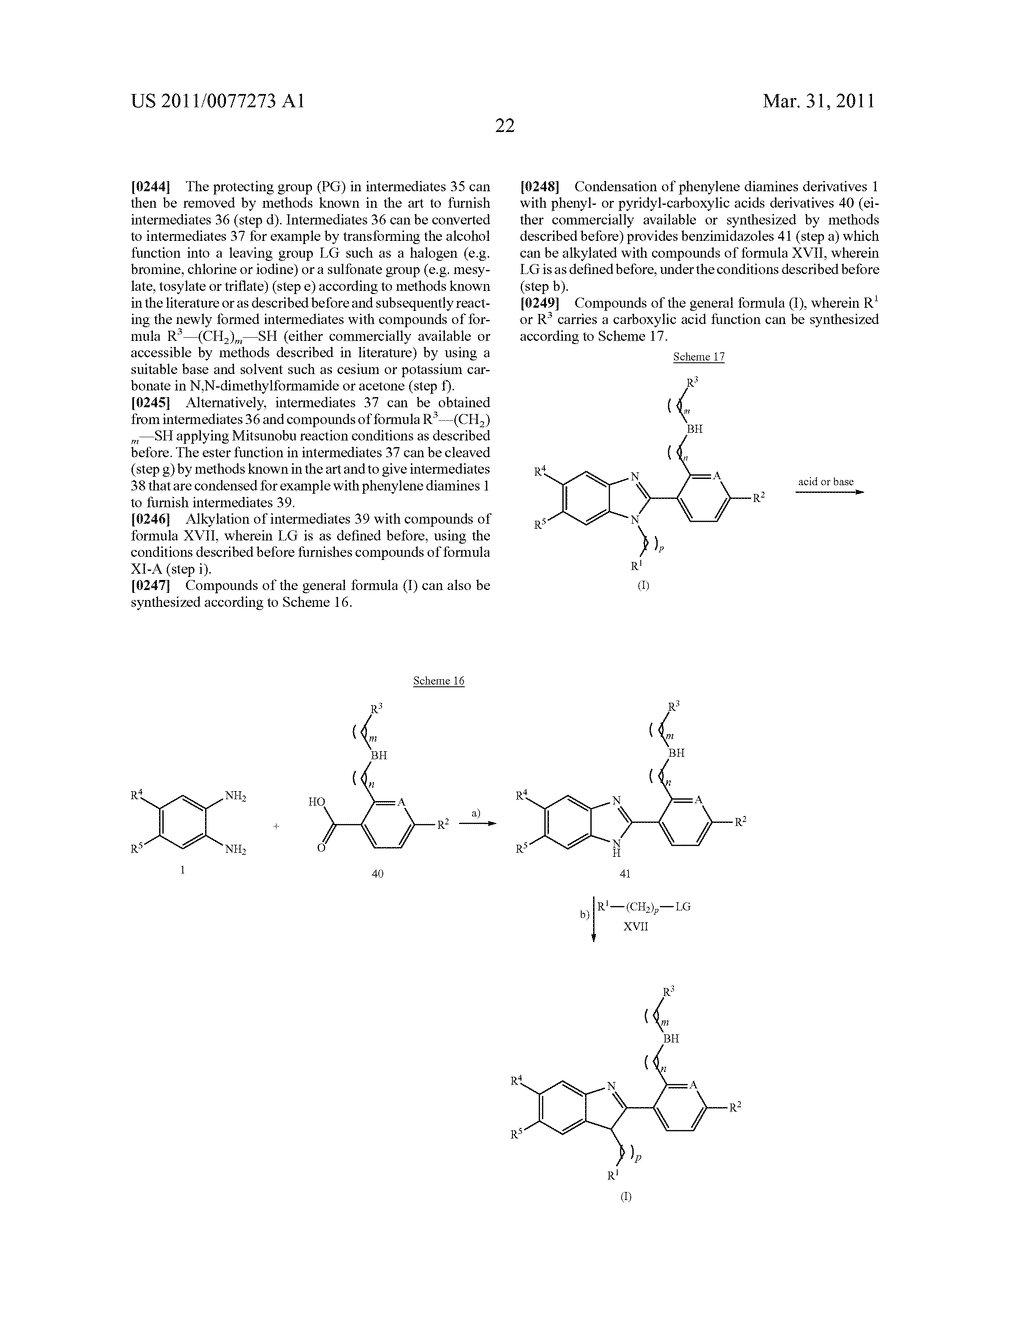 NEW BENZIMIDAZOLE DERIVATIVES - diagram, schematic, and image 23